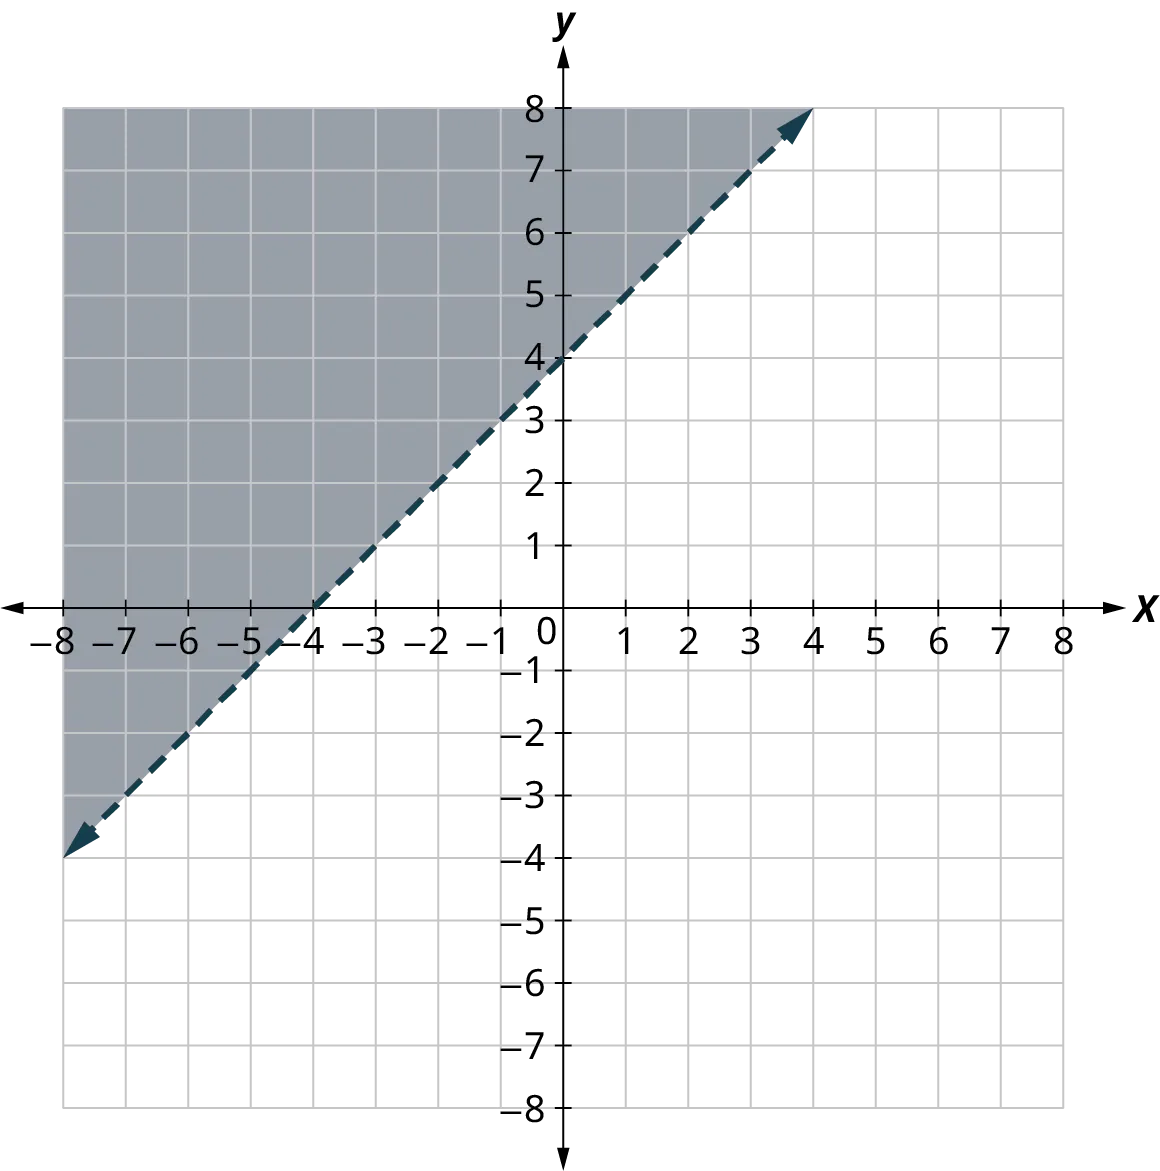 A dashed line is plotted on an x y coordinate plane. The x and y axes range from negative 8 to 8, in increments of 1. The line passes through the following points, (negative 8, negative 4), (negative 4, 0), (0, 4), and (4, 8). The region above the line is shaded.